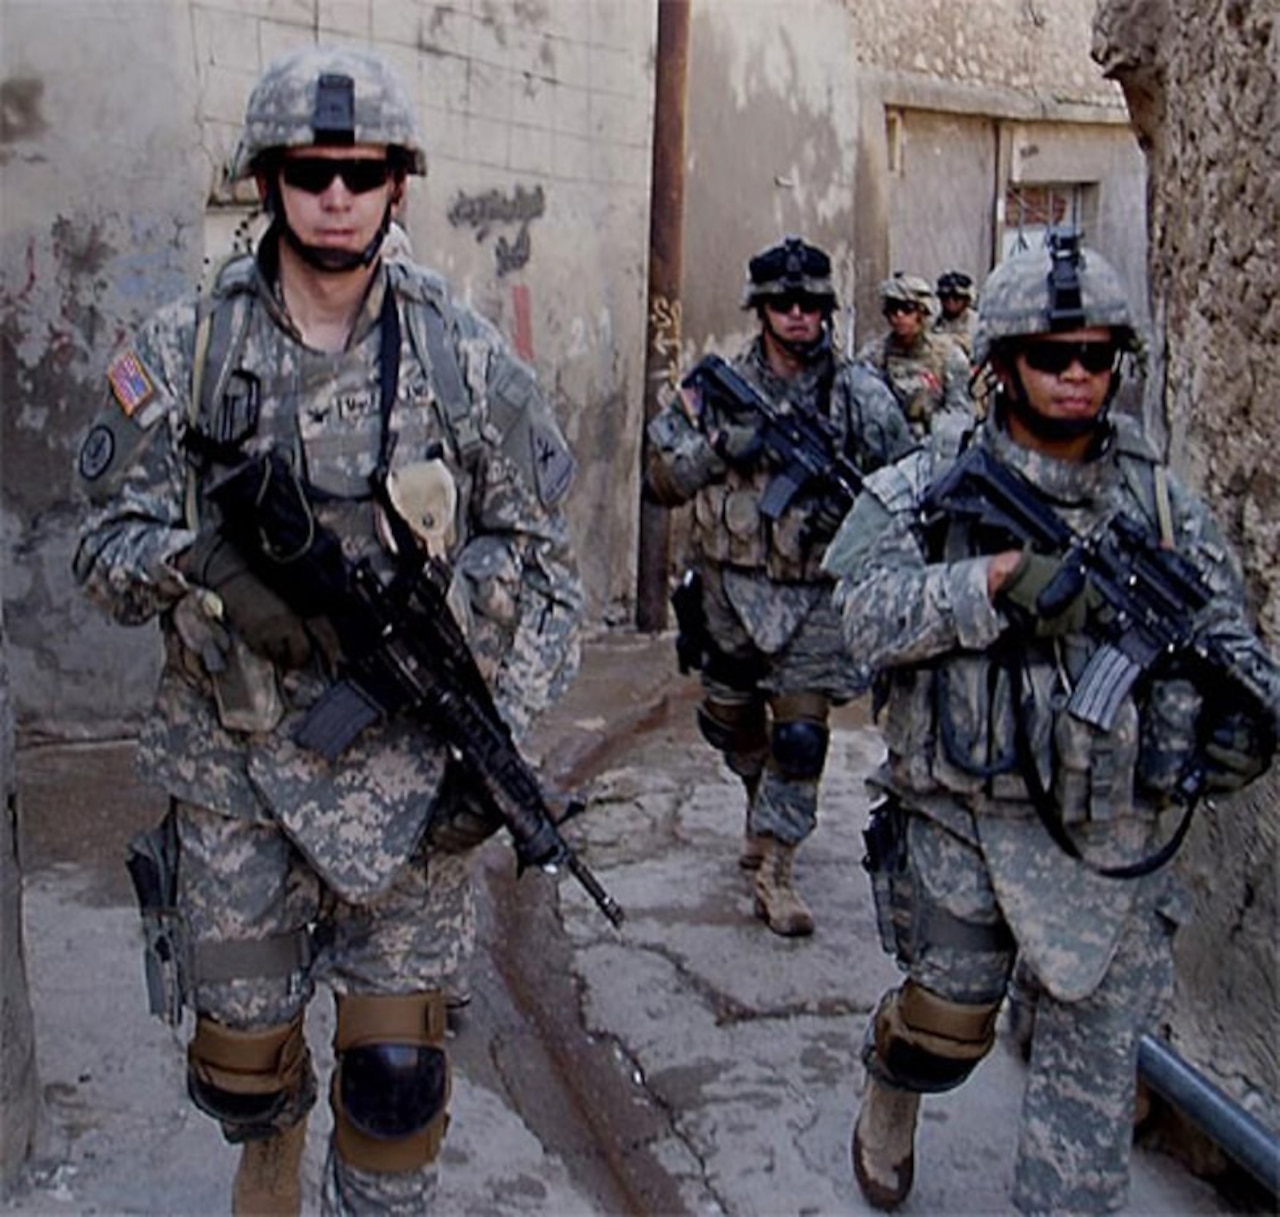 Five soldiers, dressed in combat gear and carrying weapons, walk down a narrow path with buildings on either side.